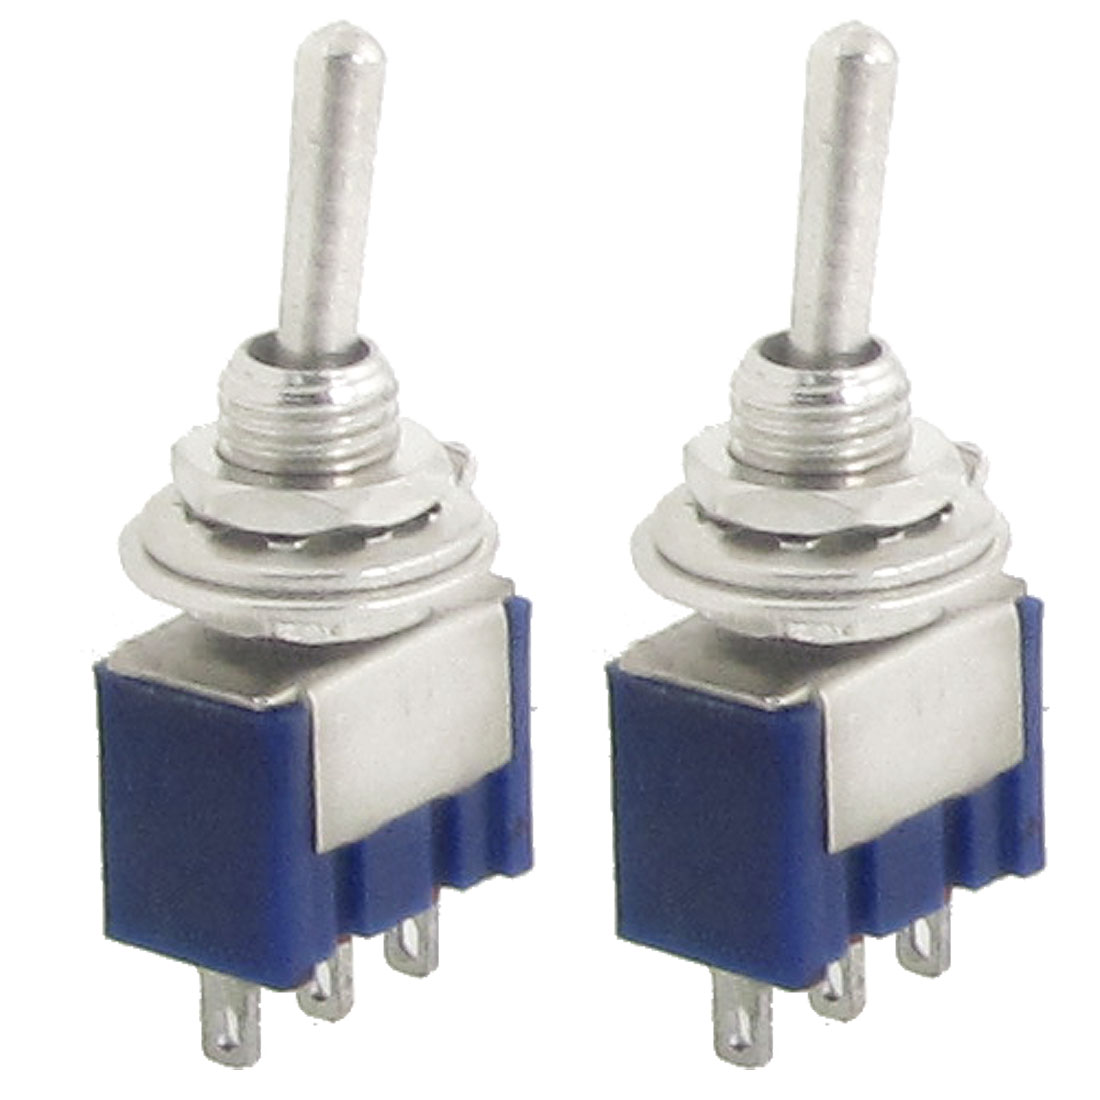 Unique Bargains 2 Pcs AC 125V 6A 3 Pins ON/ON 2 Position SPDT 3 Pins Latching Mini Toggle Switch